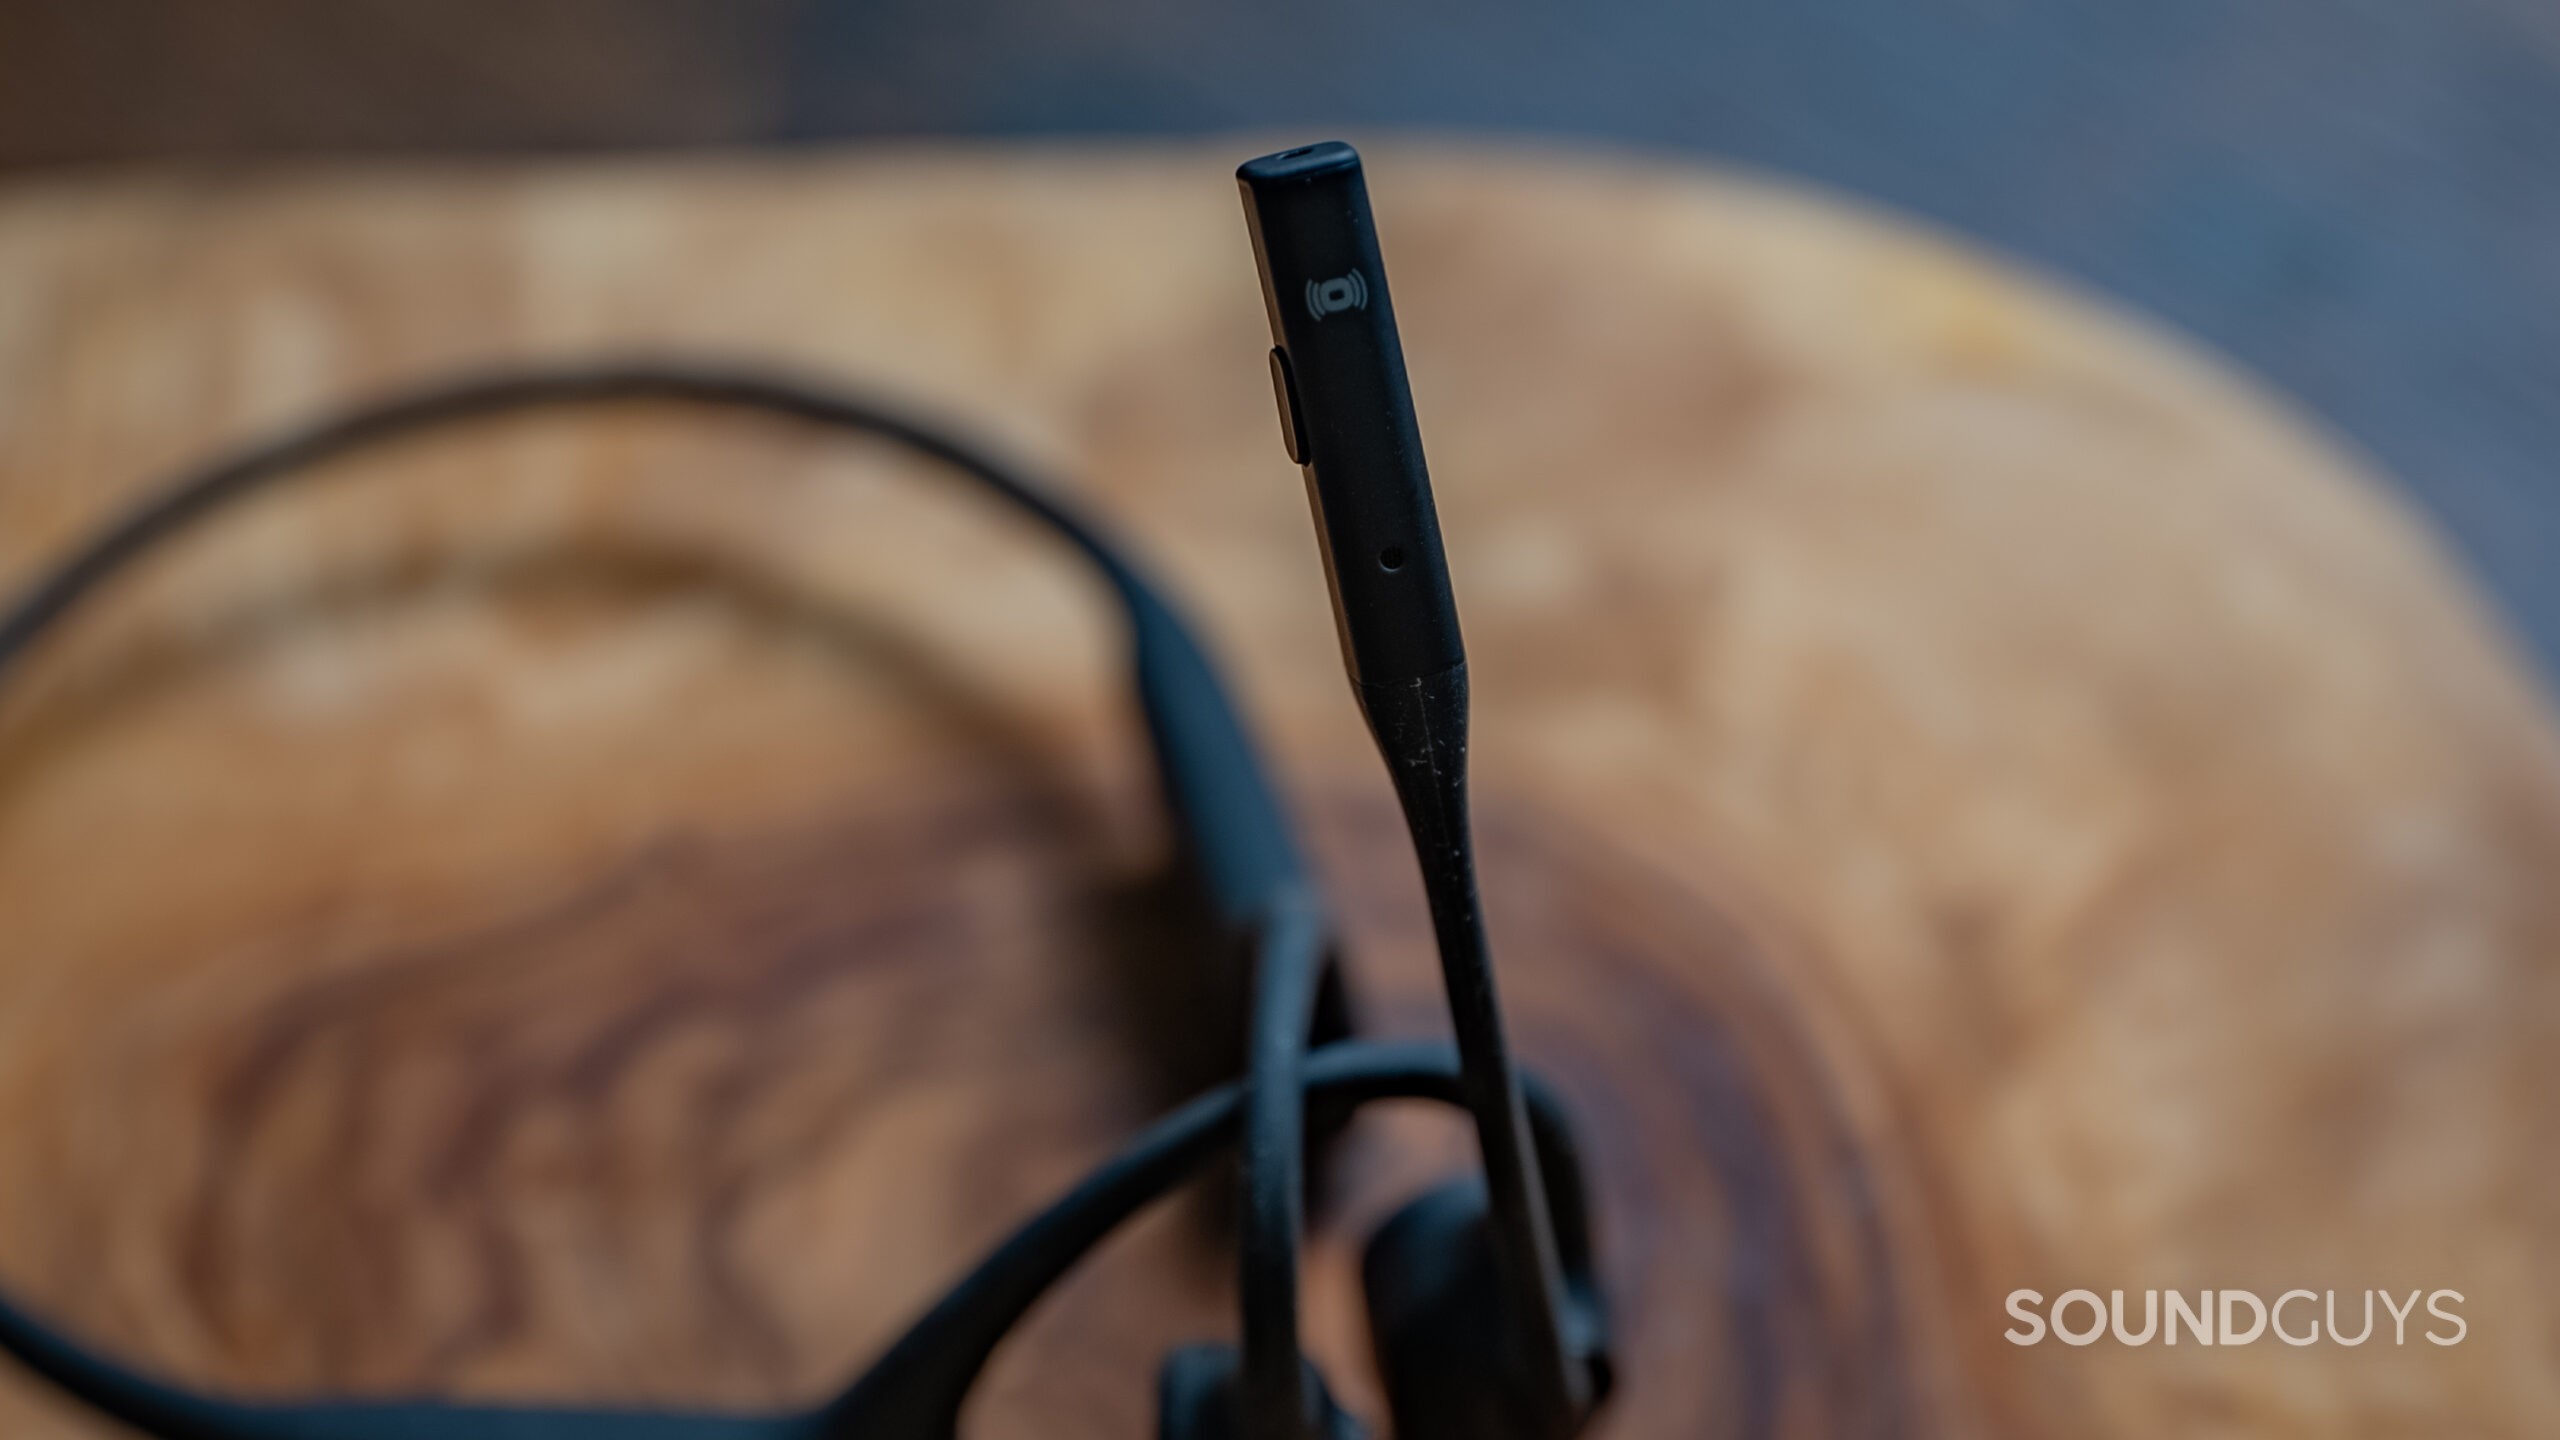 A close up of the Shokz OpenComm2 UC showing the boom microphone on a wood surface.